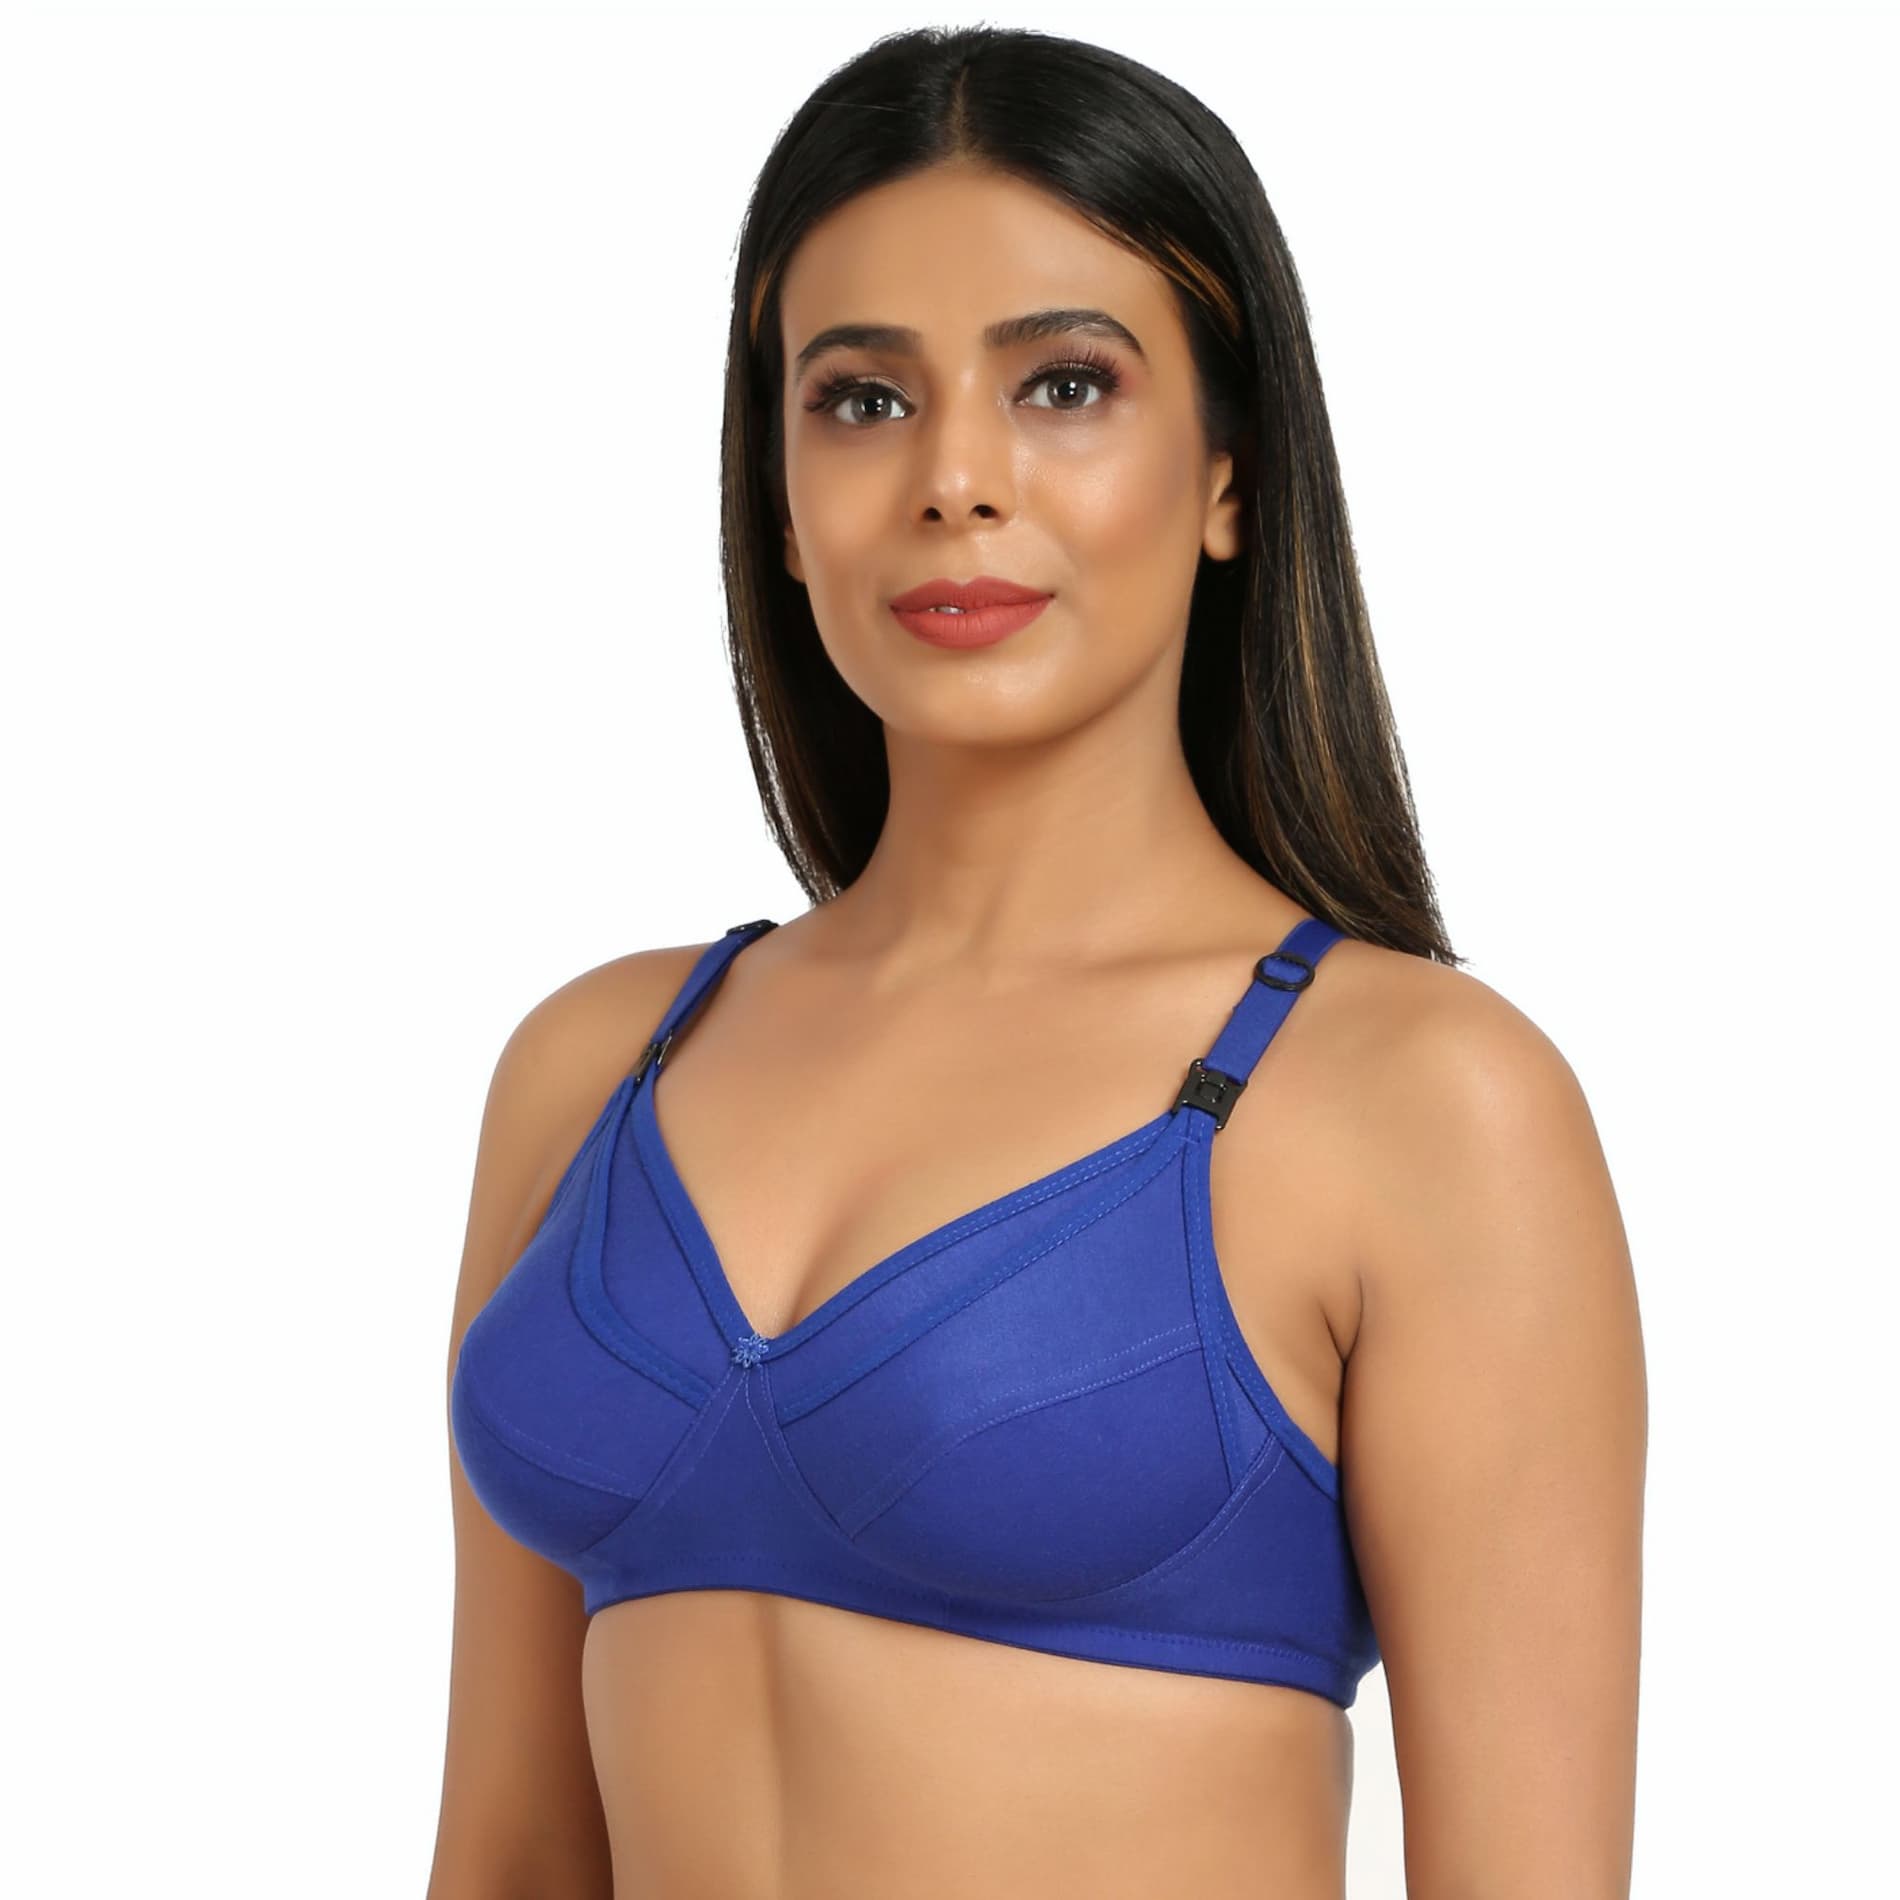 Mylo Maternity/Nursing Bras Non-Wired, Non-Padded with free Bra Extender – Persian Blue 32 B 